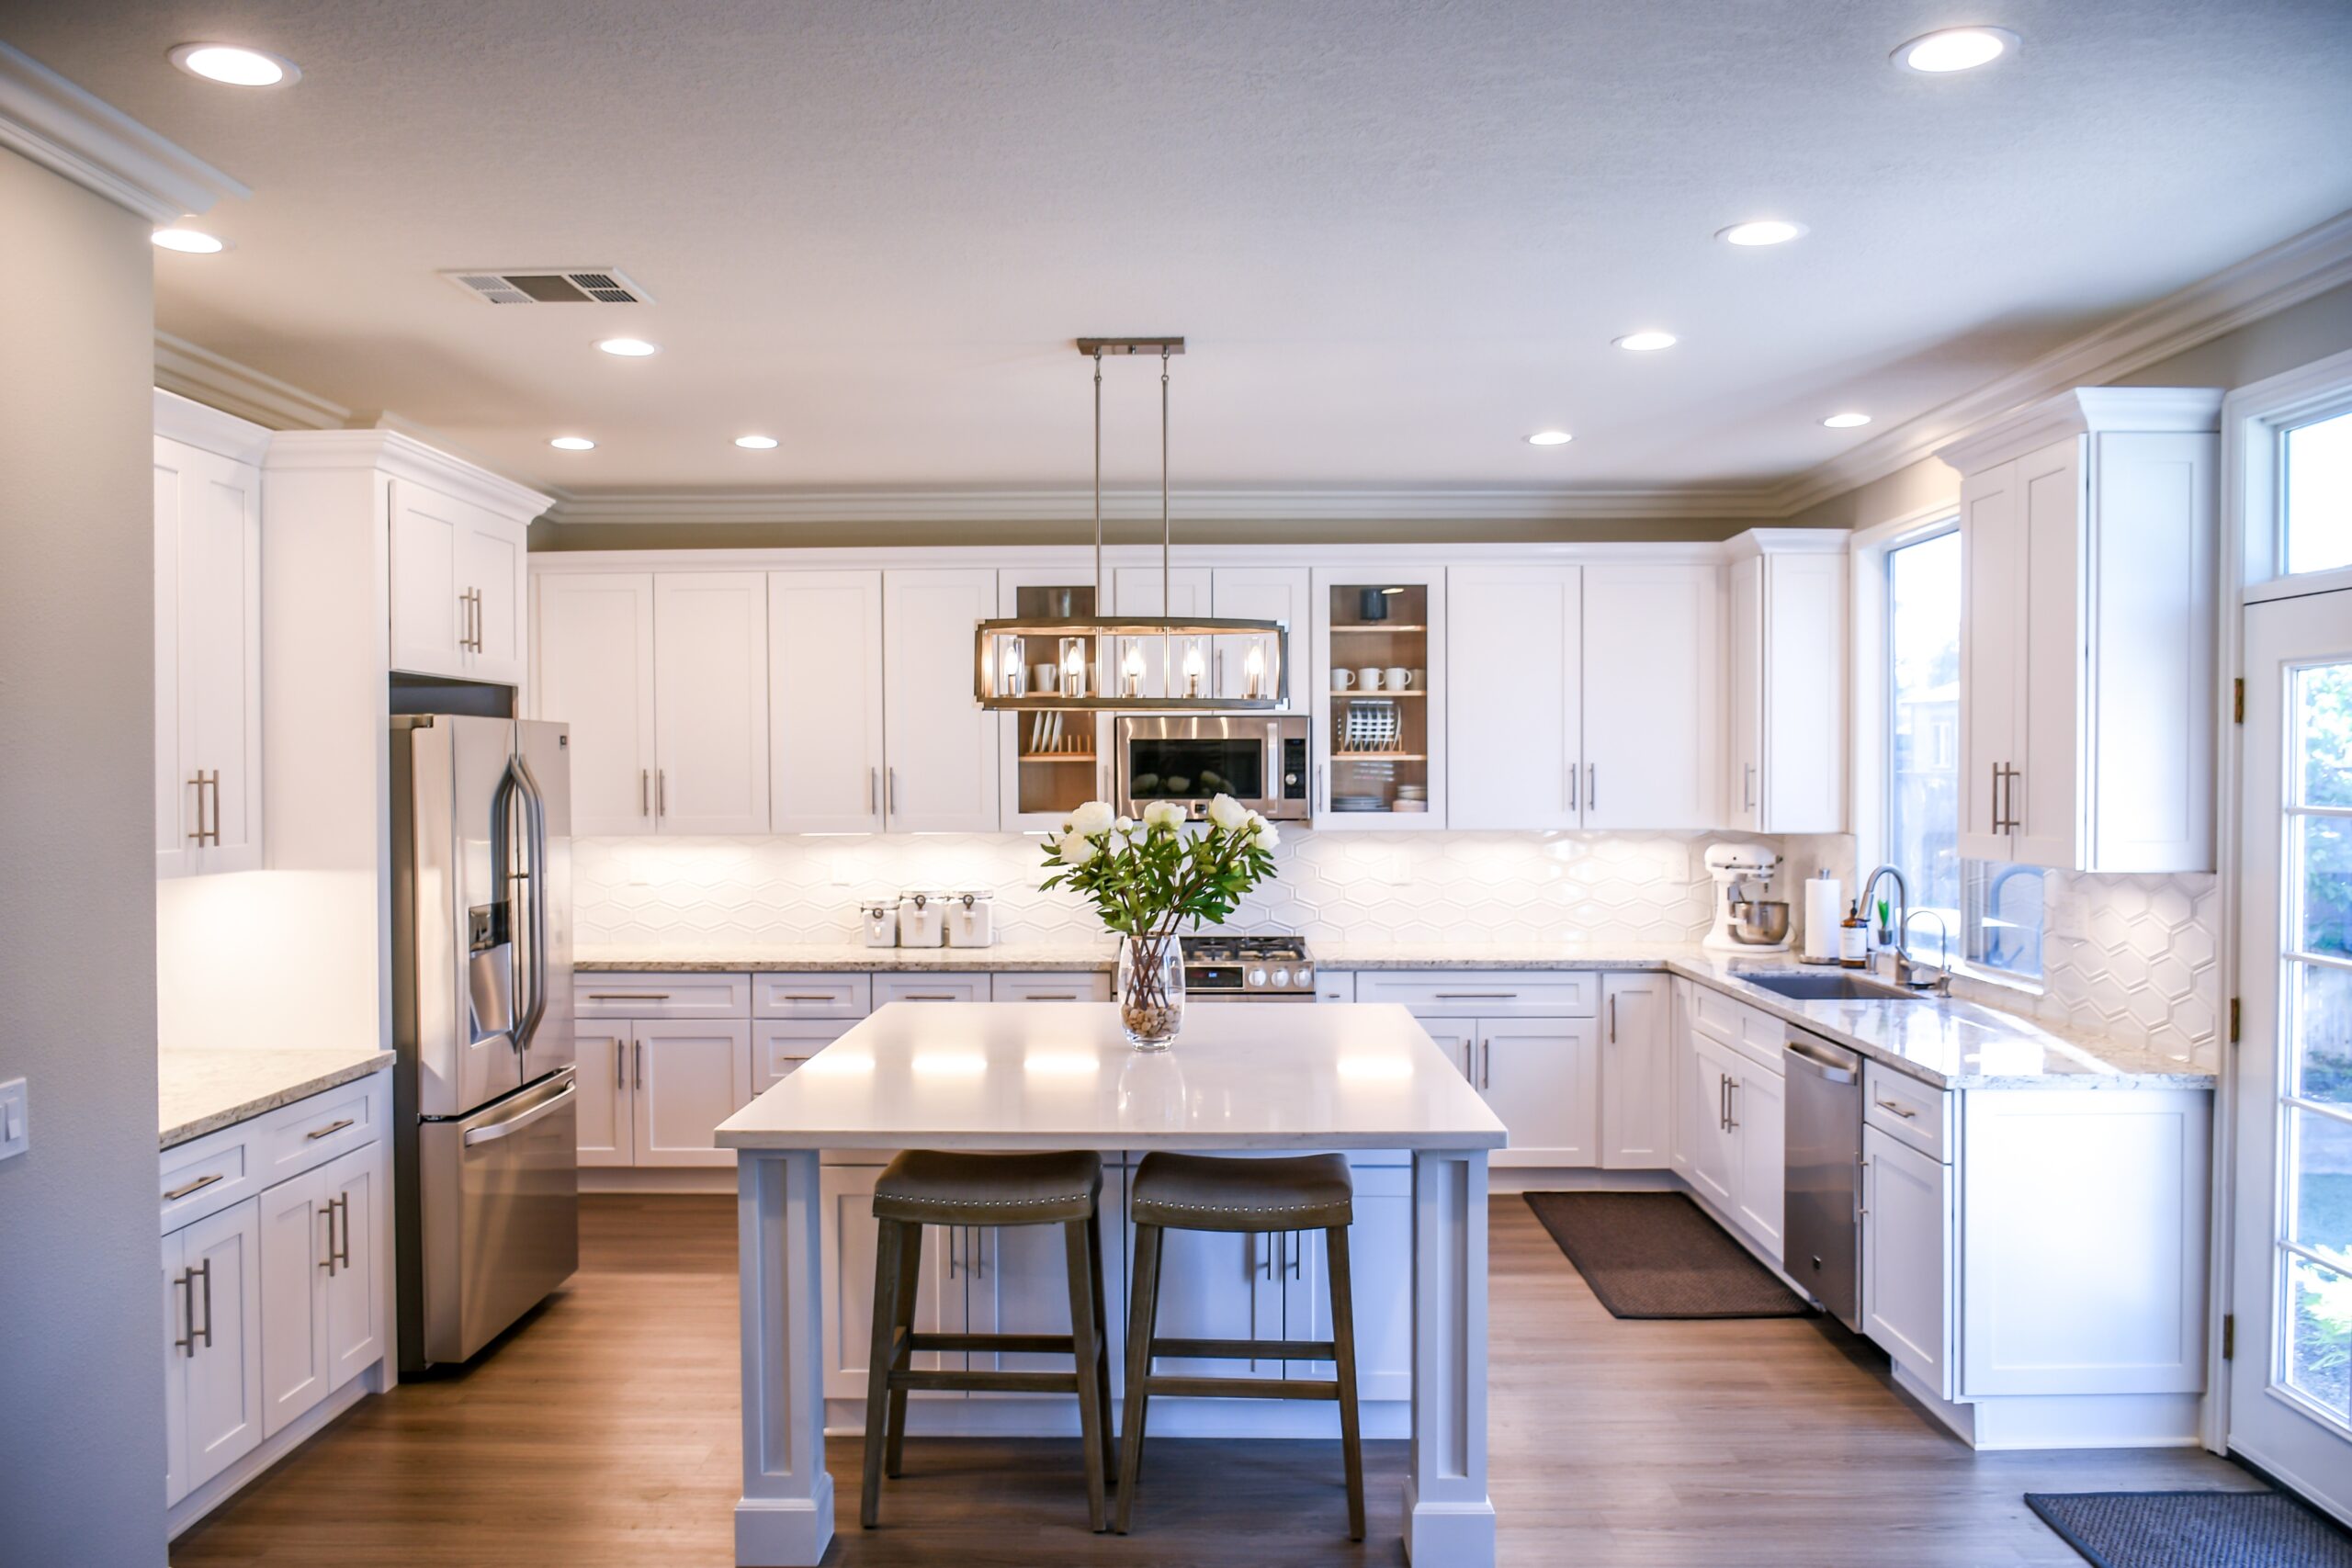 A kitchen with recessed electrical can lights, a modern island light fixture, and under cabinet lighting.